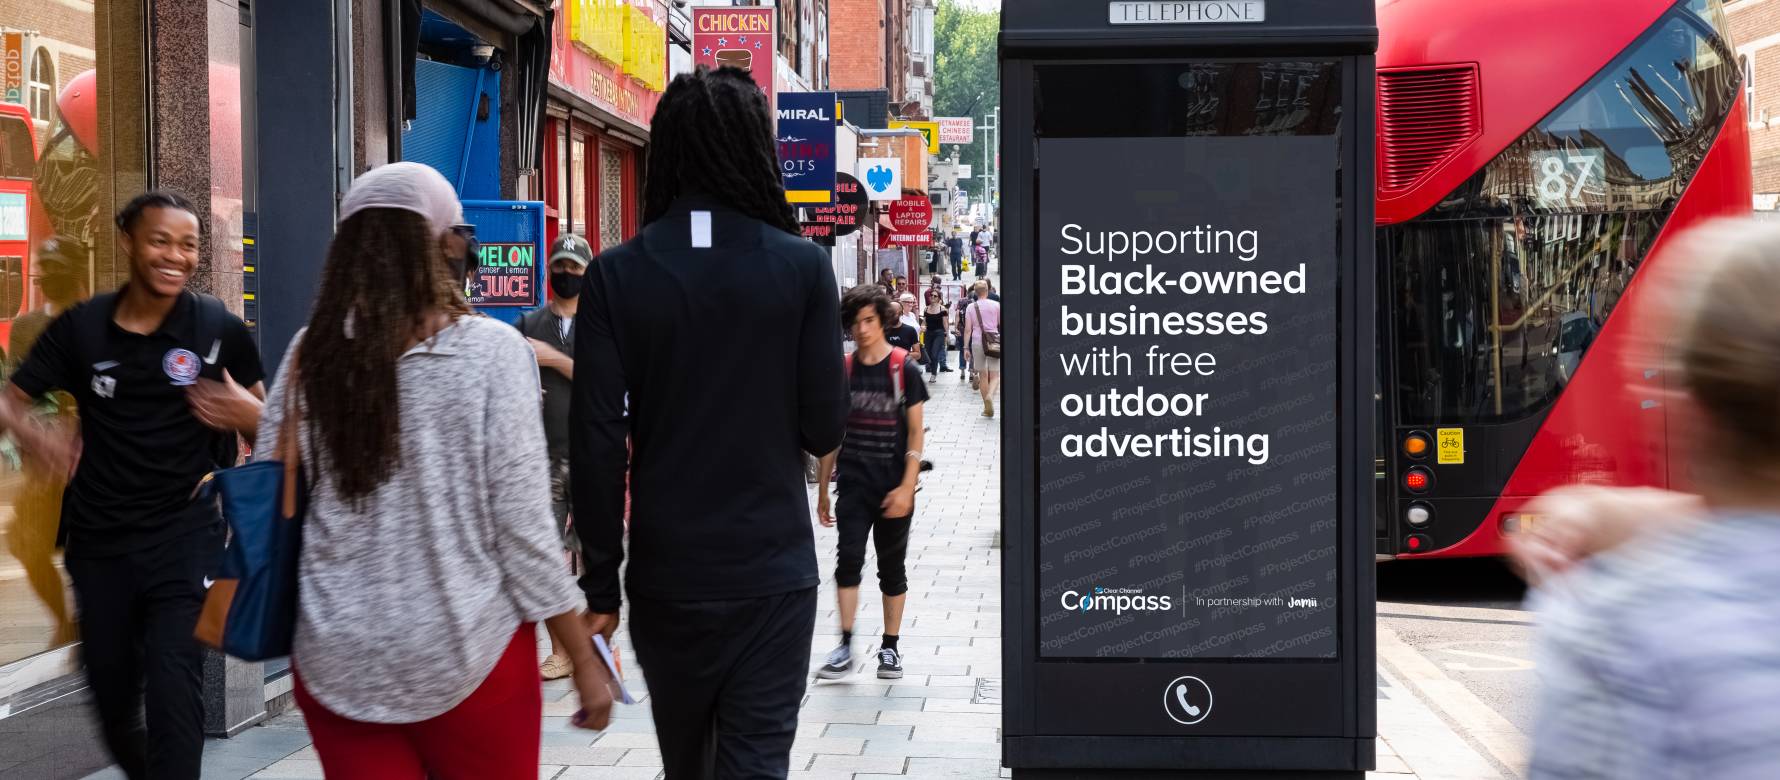 Adshel screen displays black image and text 'Supporting Black-owned businesses with free outdoor advertising.'